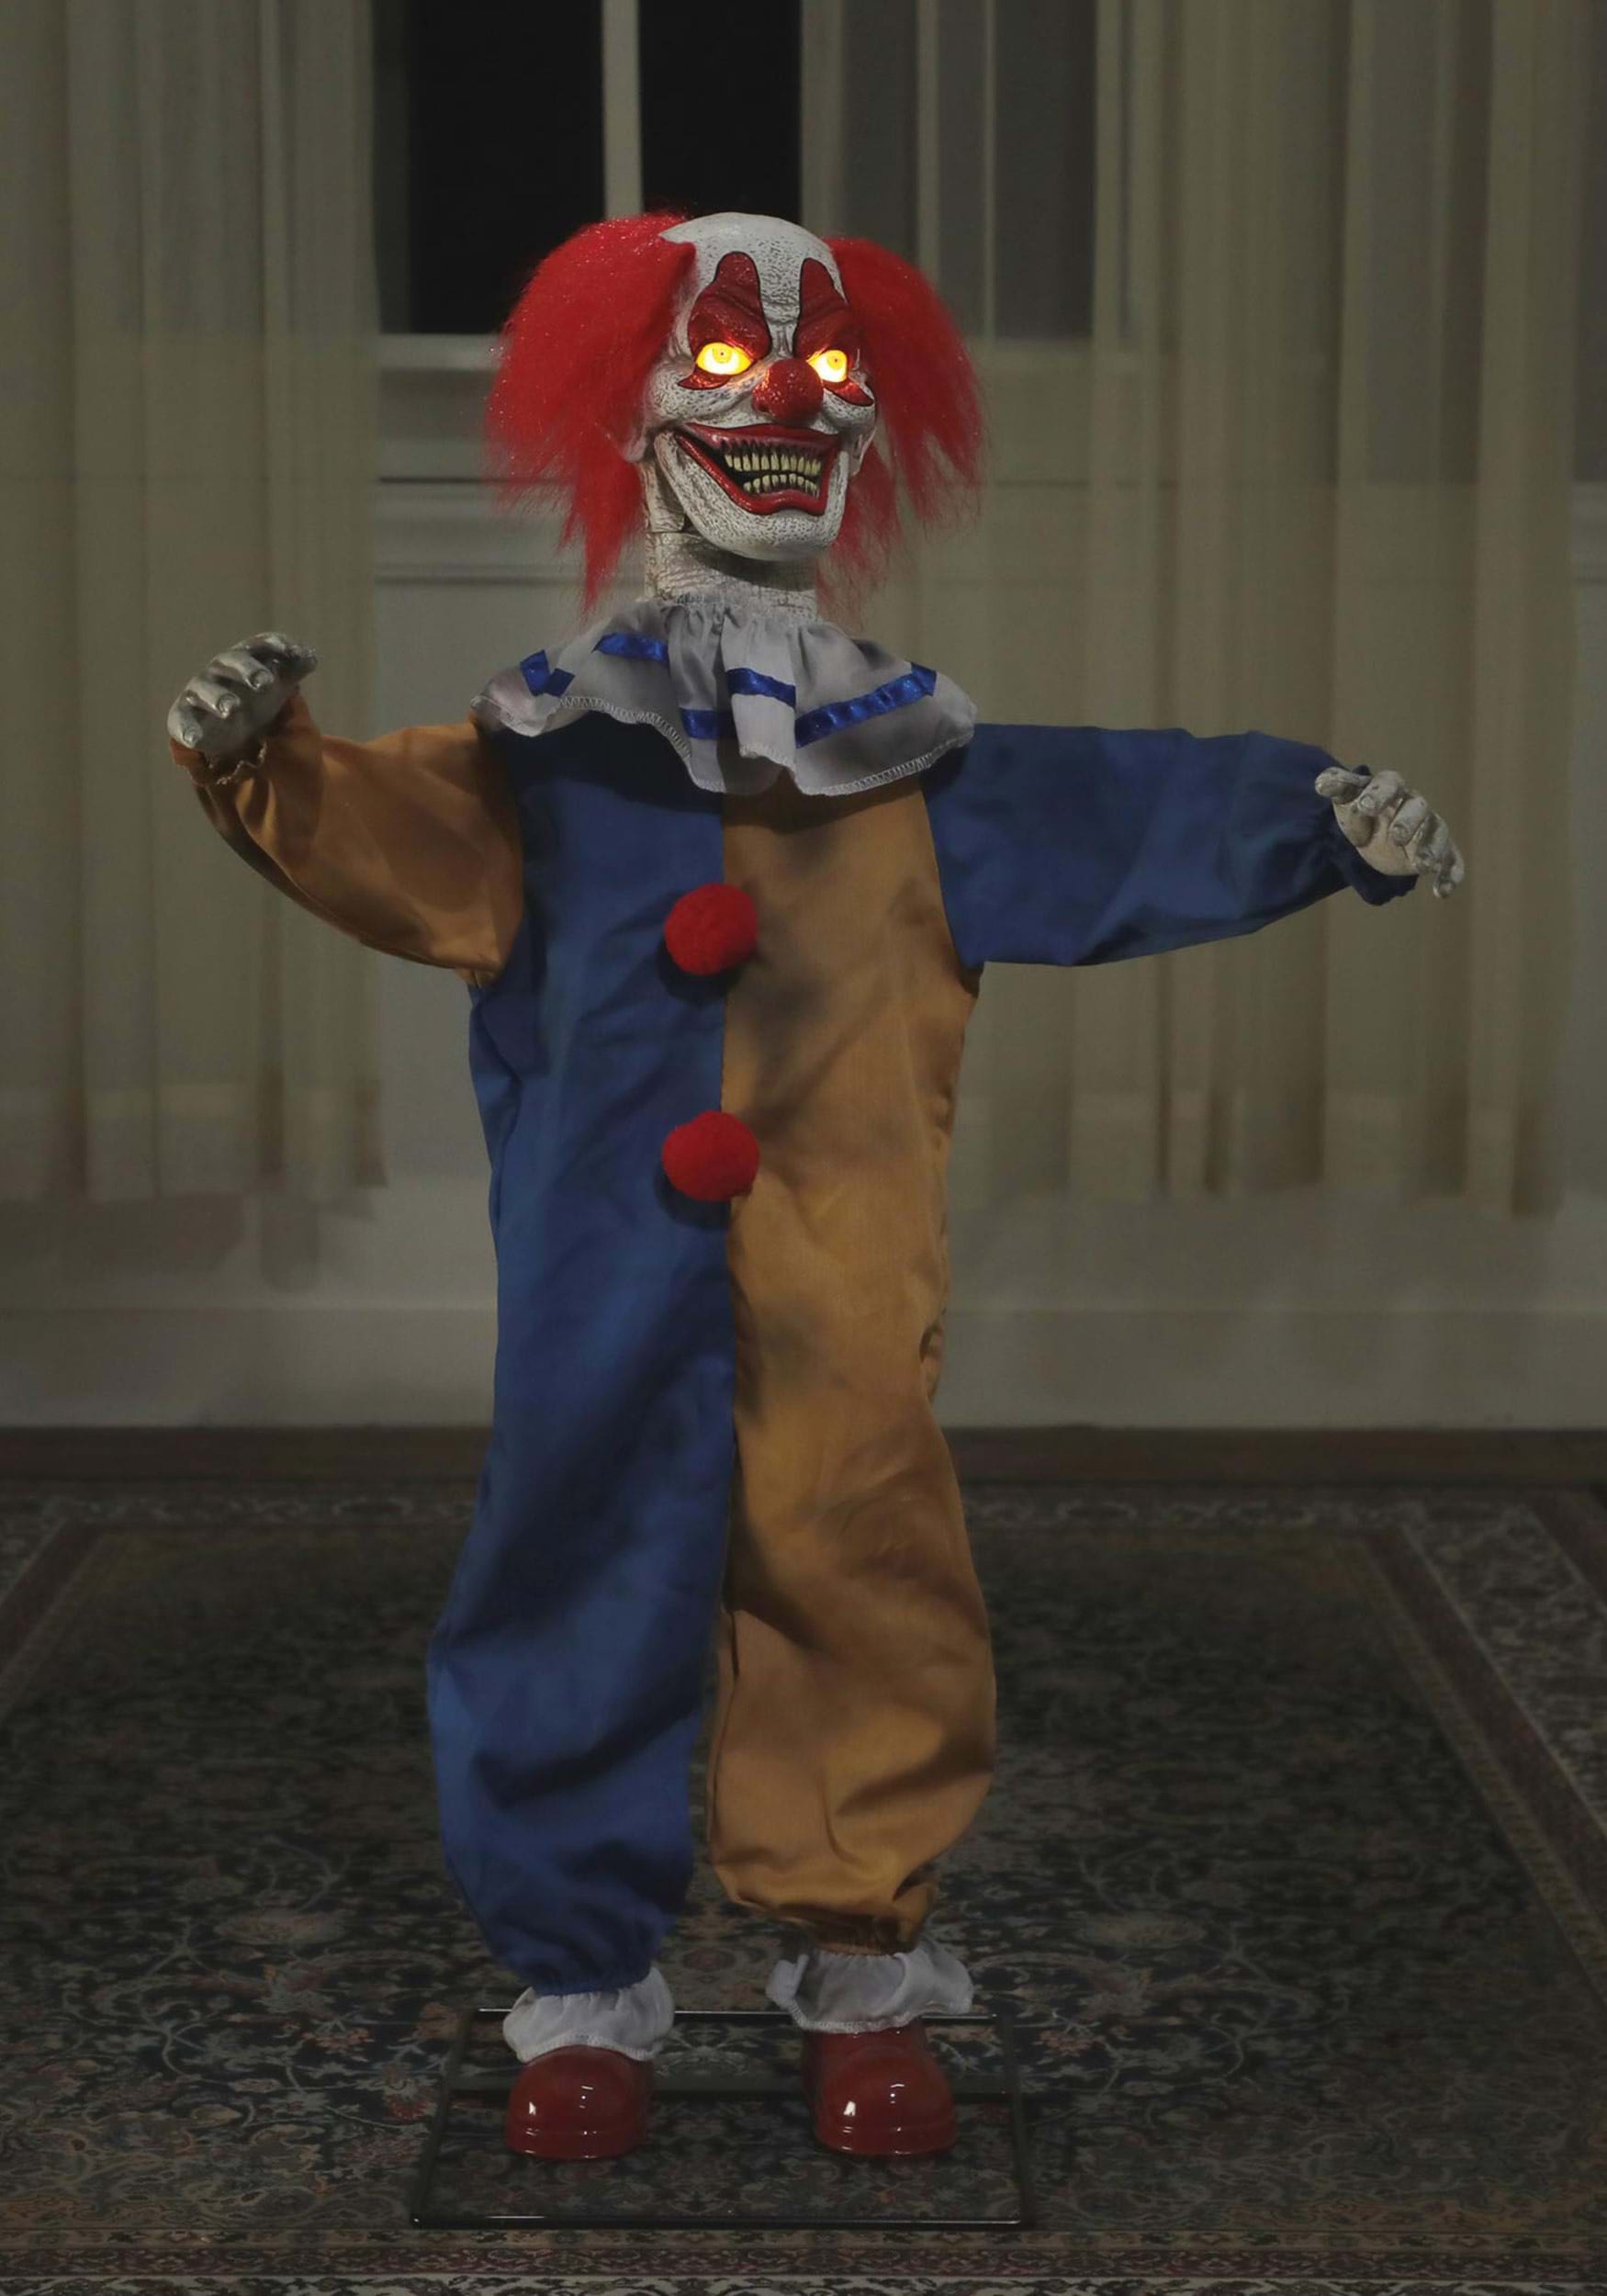 Animated 36-Inch Little Top Clown Prop